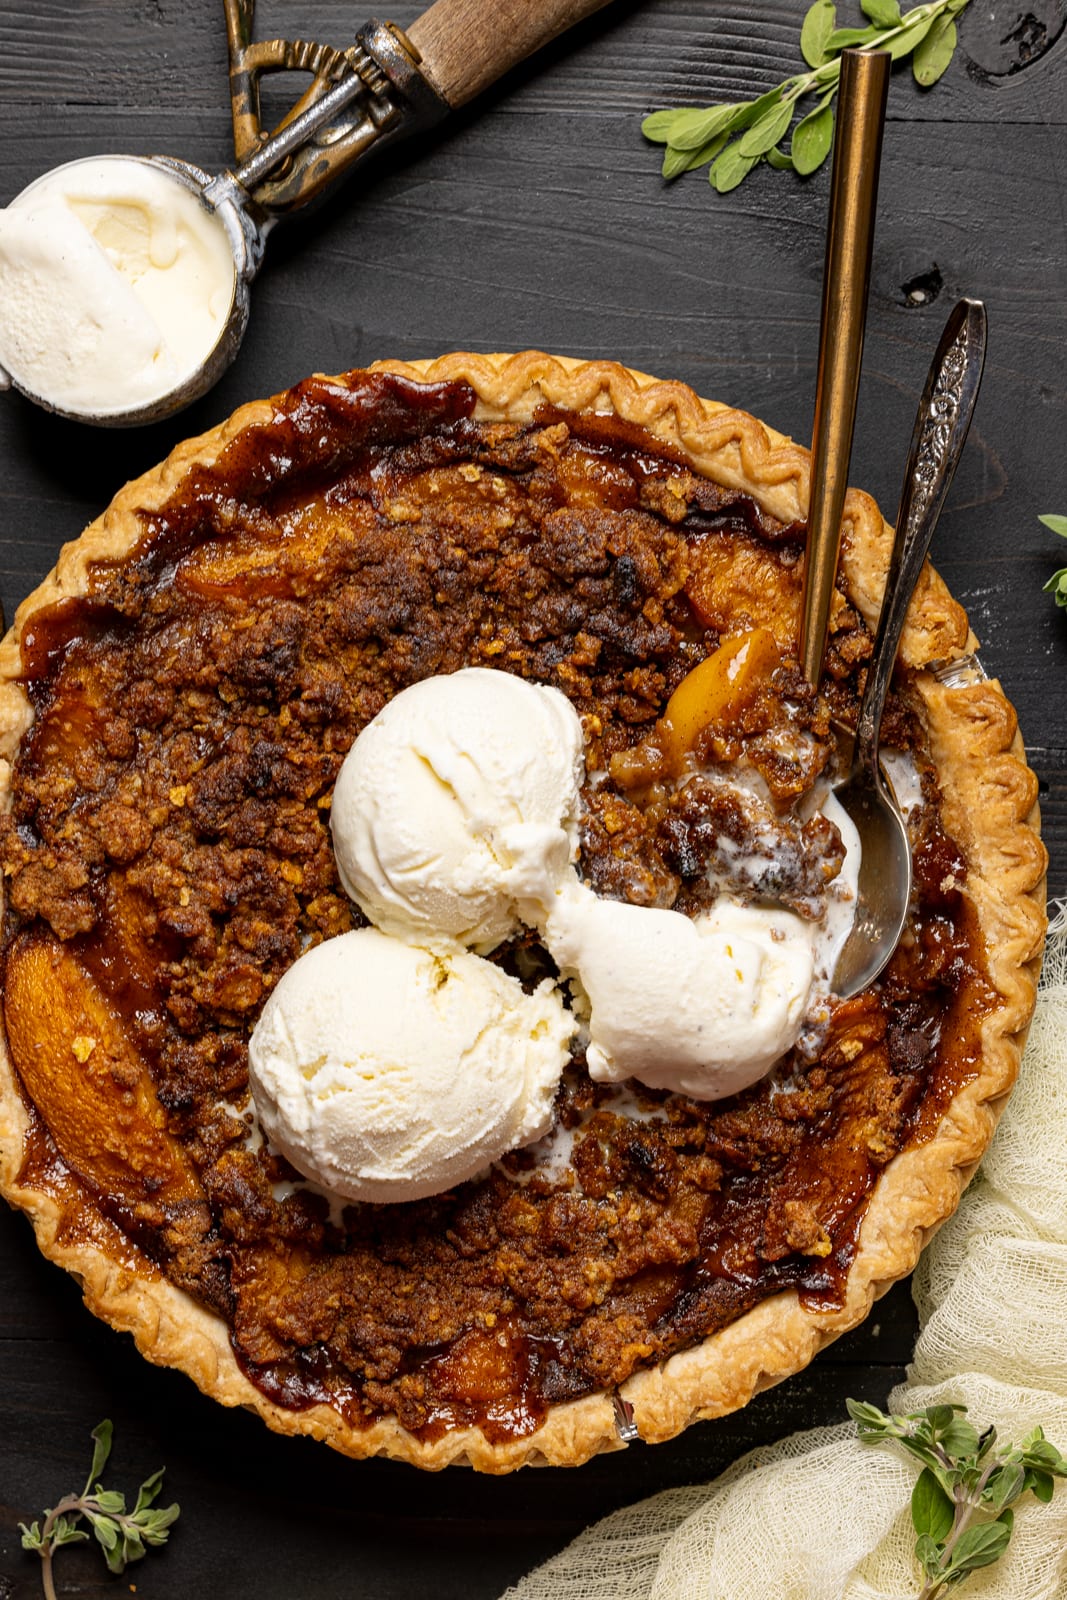 Pie on a black wood table with scoops of ice cream, spoons, and herbs. 